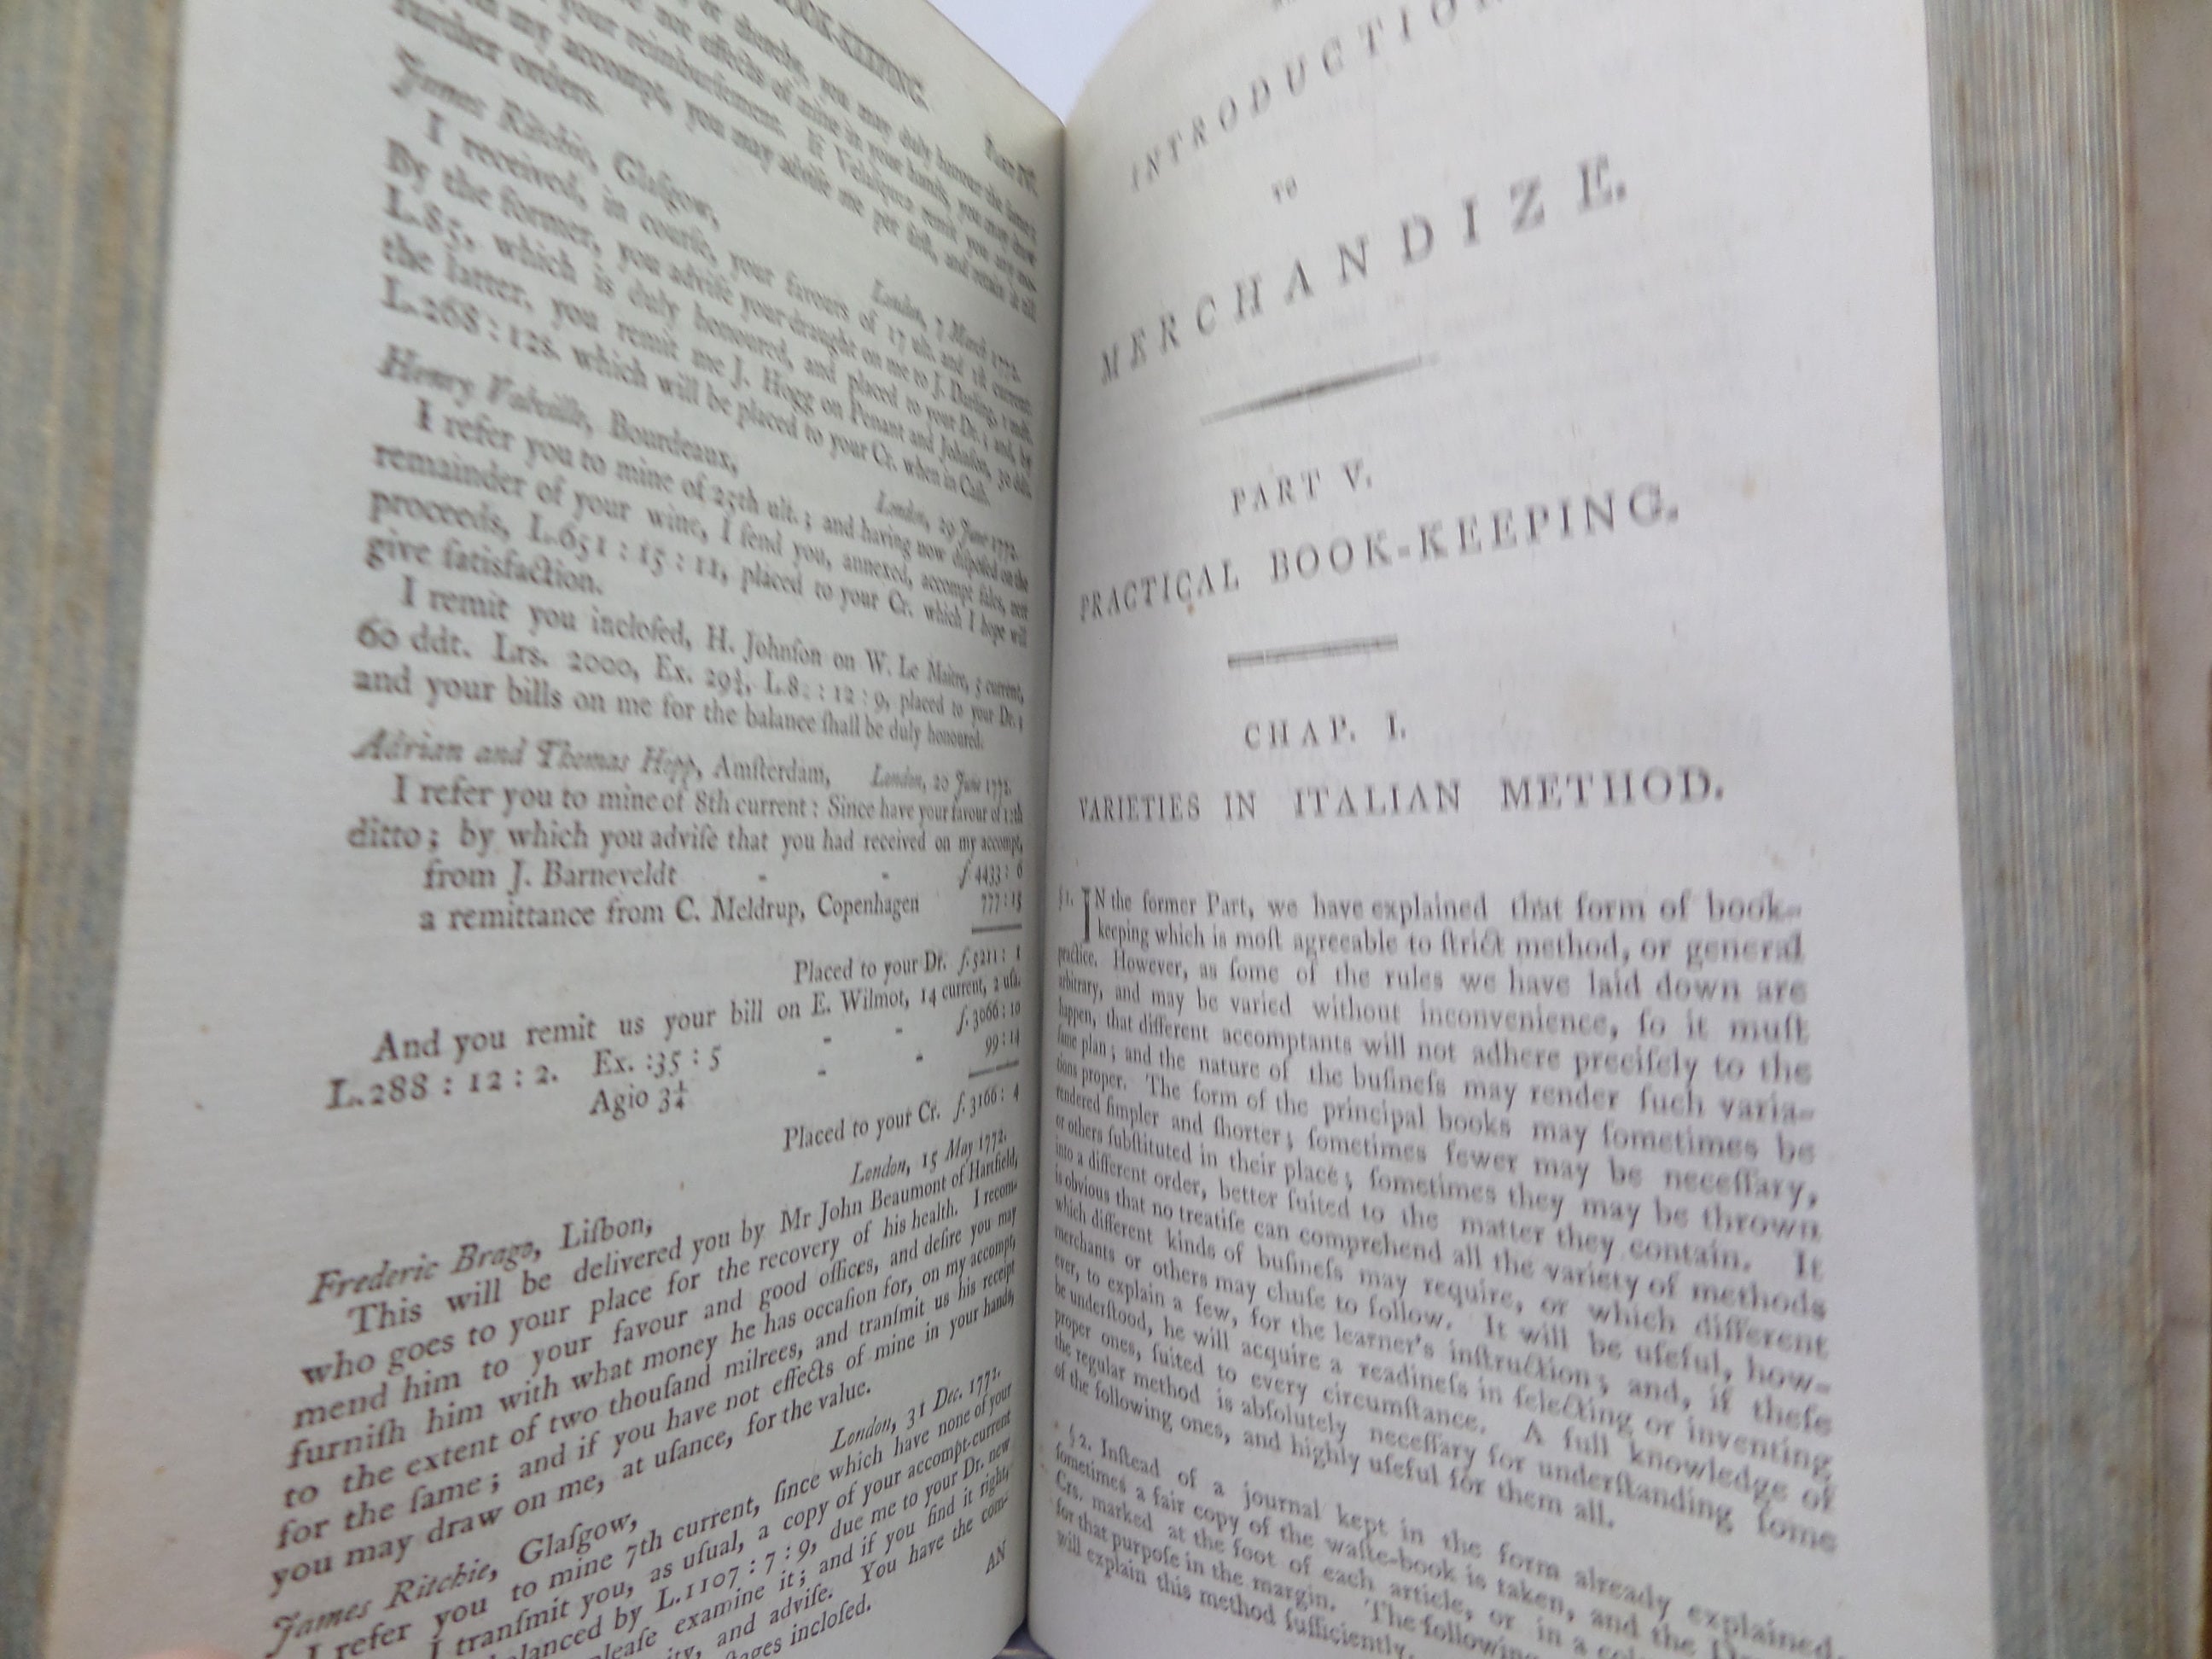 AN INTRODUCTION TO MERCHANDISE BY ROBERT HAMILTON 1802 FIFTH EDITION